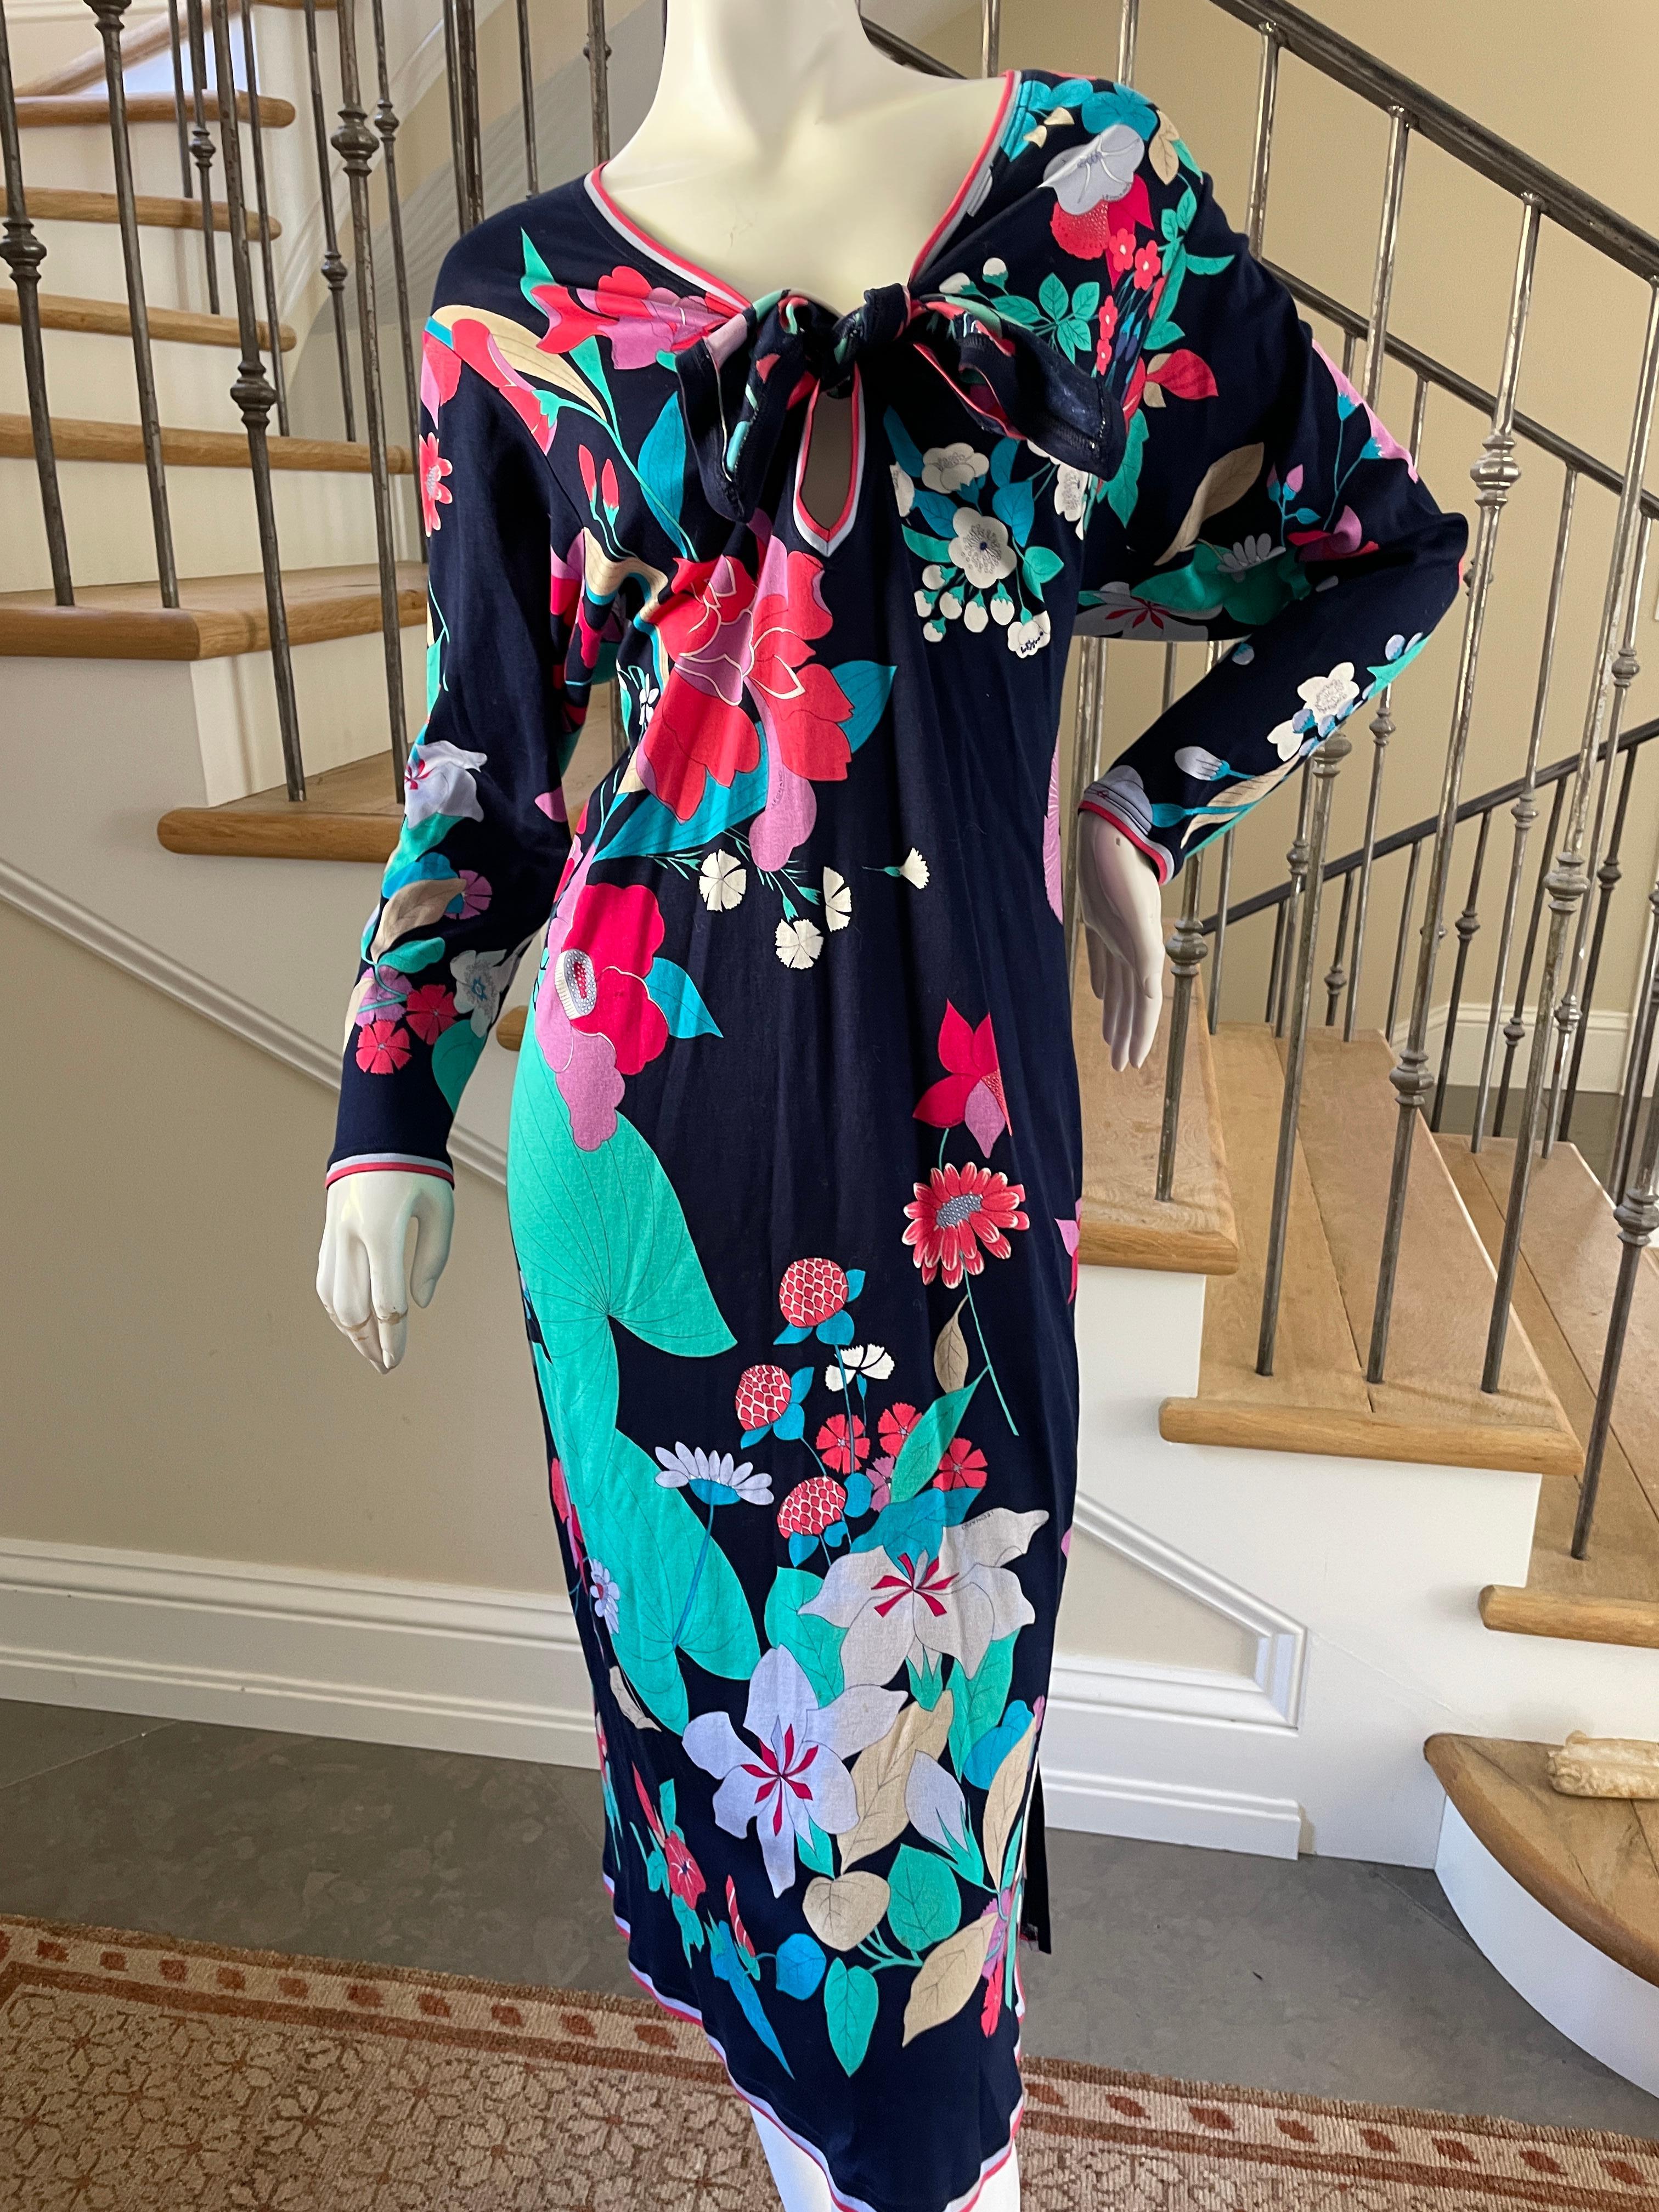 Leonard Paris Vintage 80's Cotton Jersey Floral Keyhole Dress
So pretty, please use the zoom lens to see details.

Leonard Paris was a contemporary of Pucci, both houses creating brilliant 60's patterns on silk jersey.
Both were very expensive, and